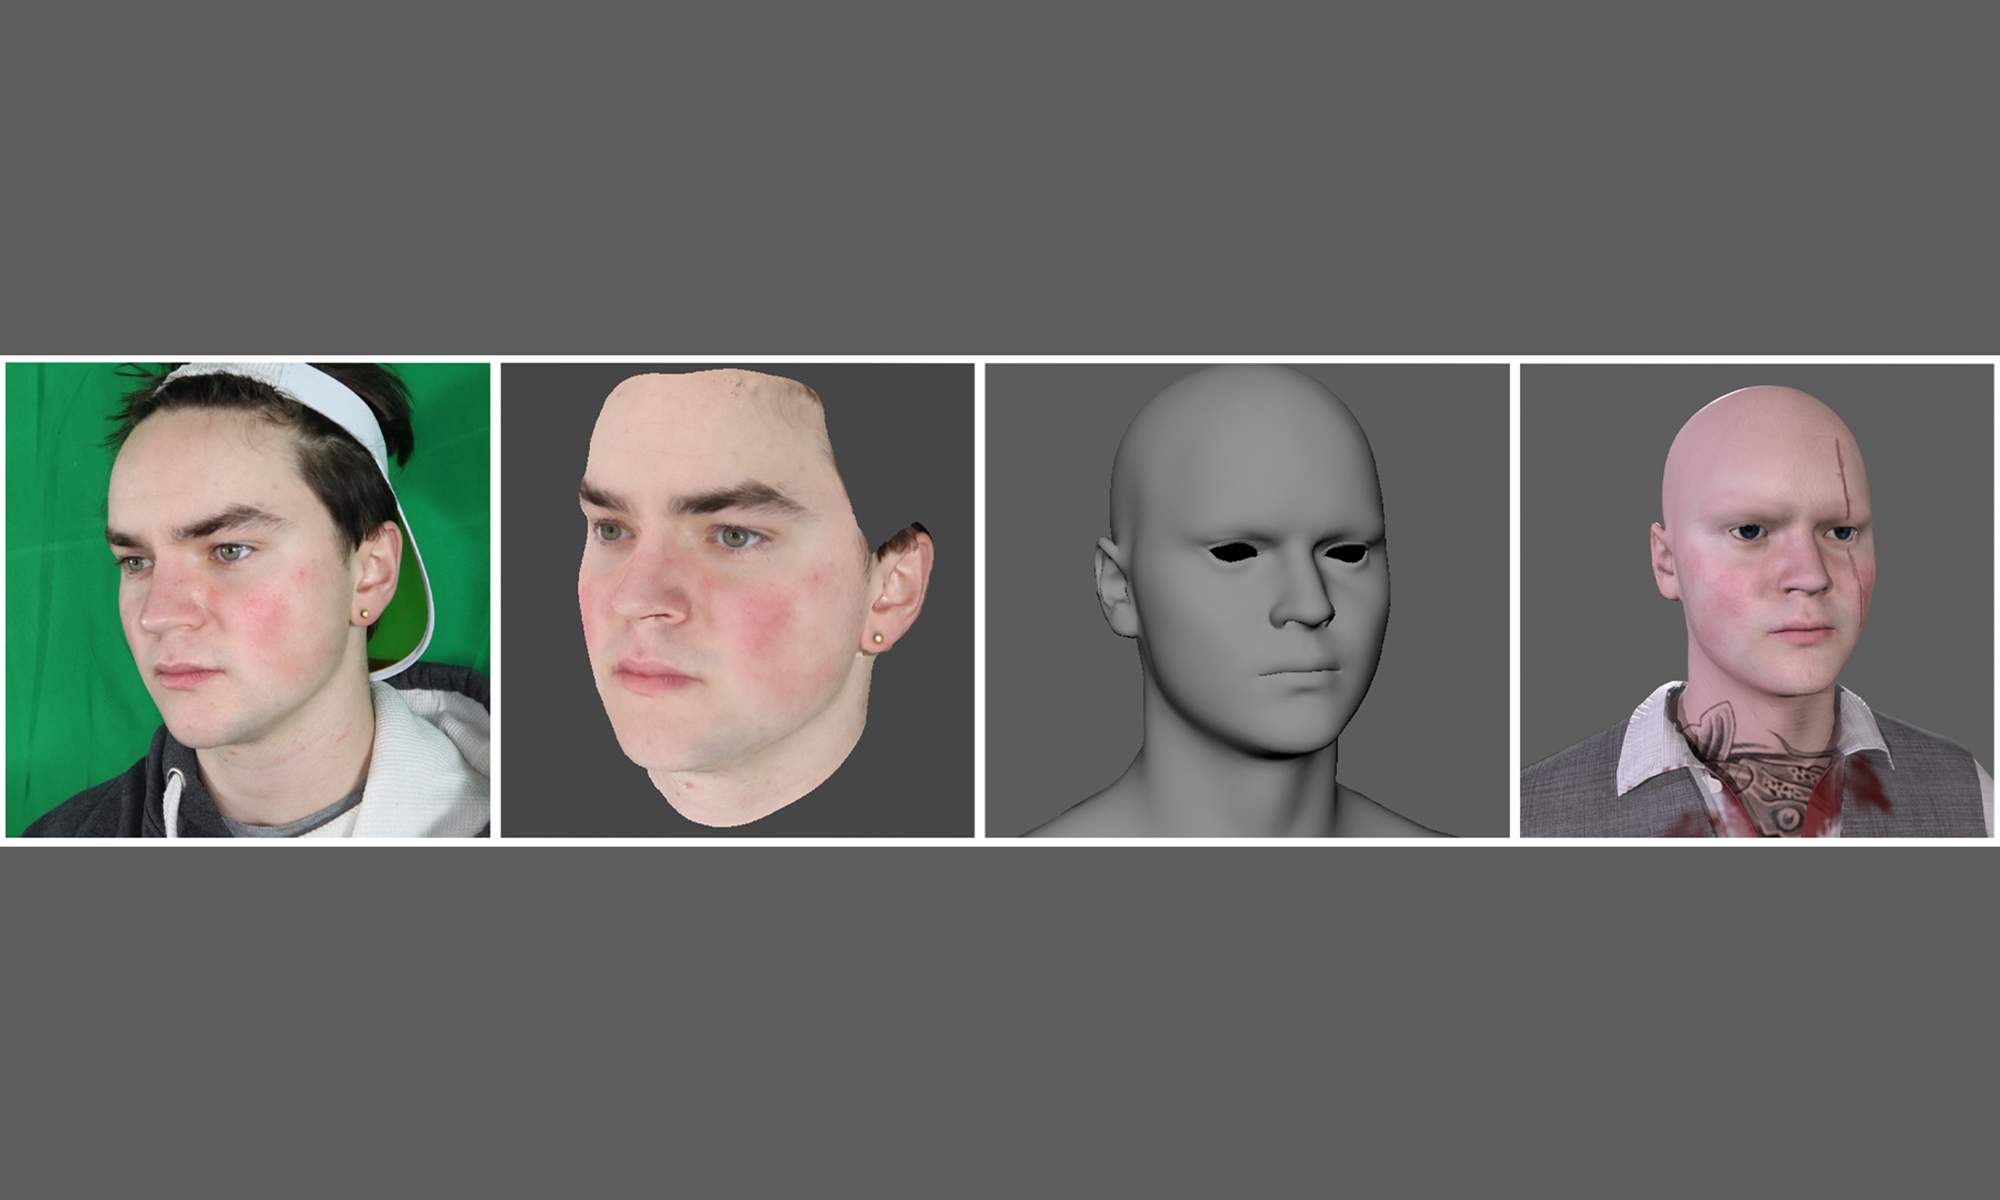 "Conquering the Uncanny Valley Using Photogrammetry" is a 2022 Digital Graduate Show project by Stuart McQuade, a Computer Arts student at Abertay University. 